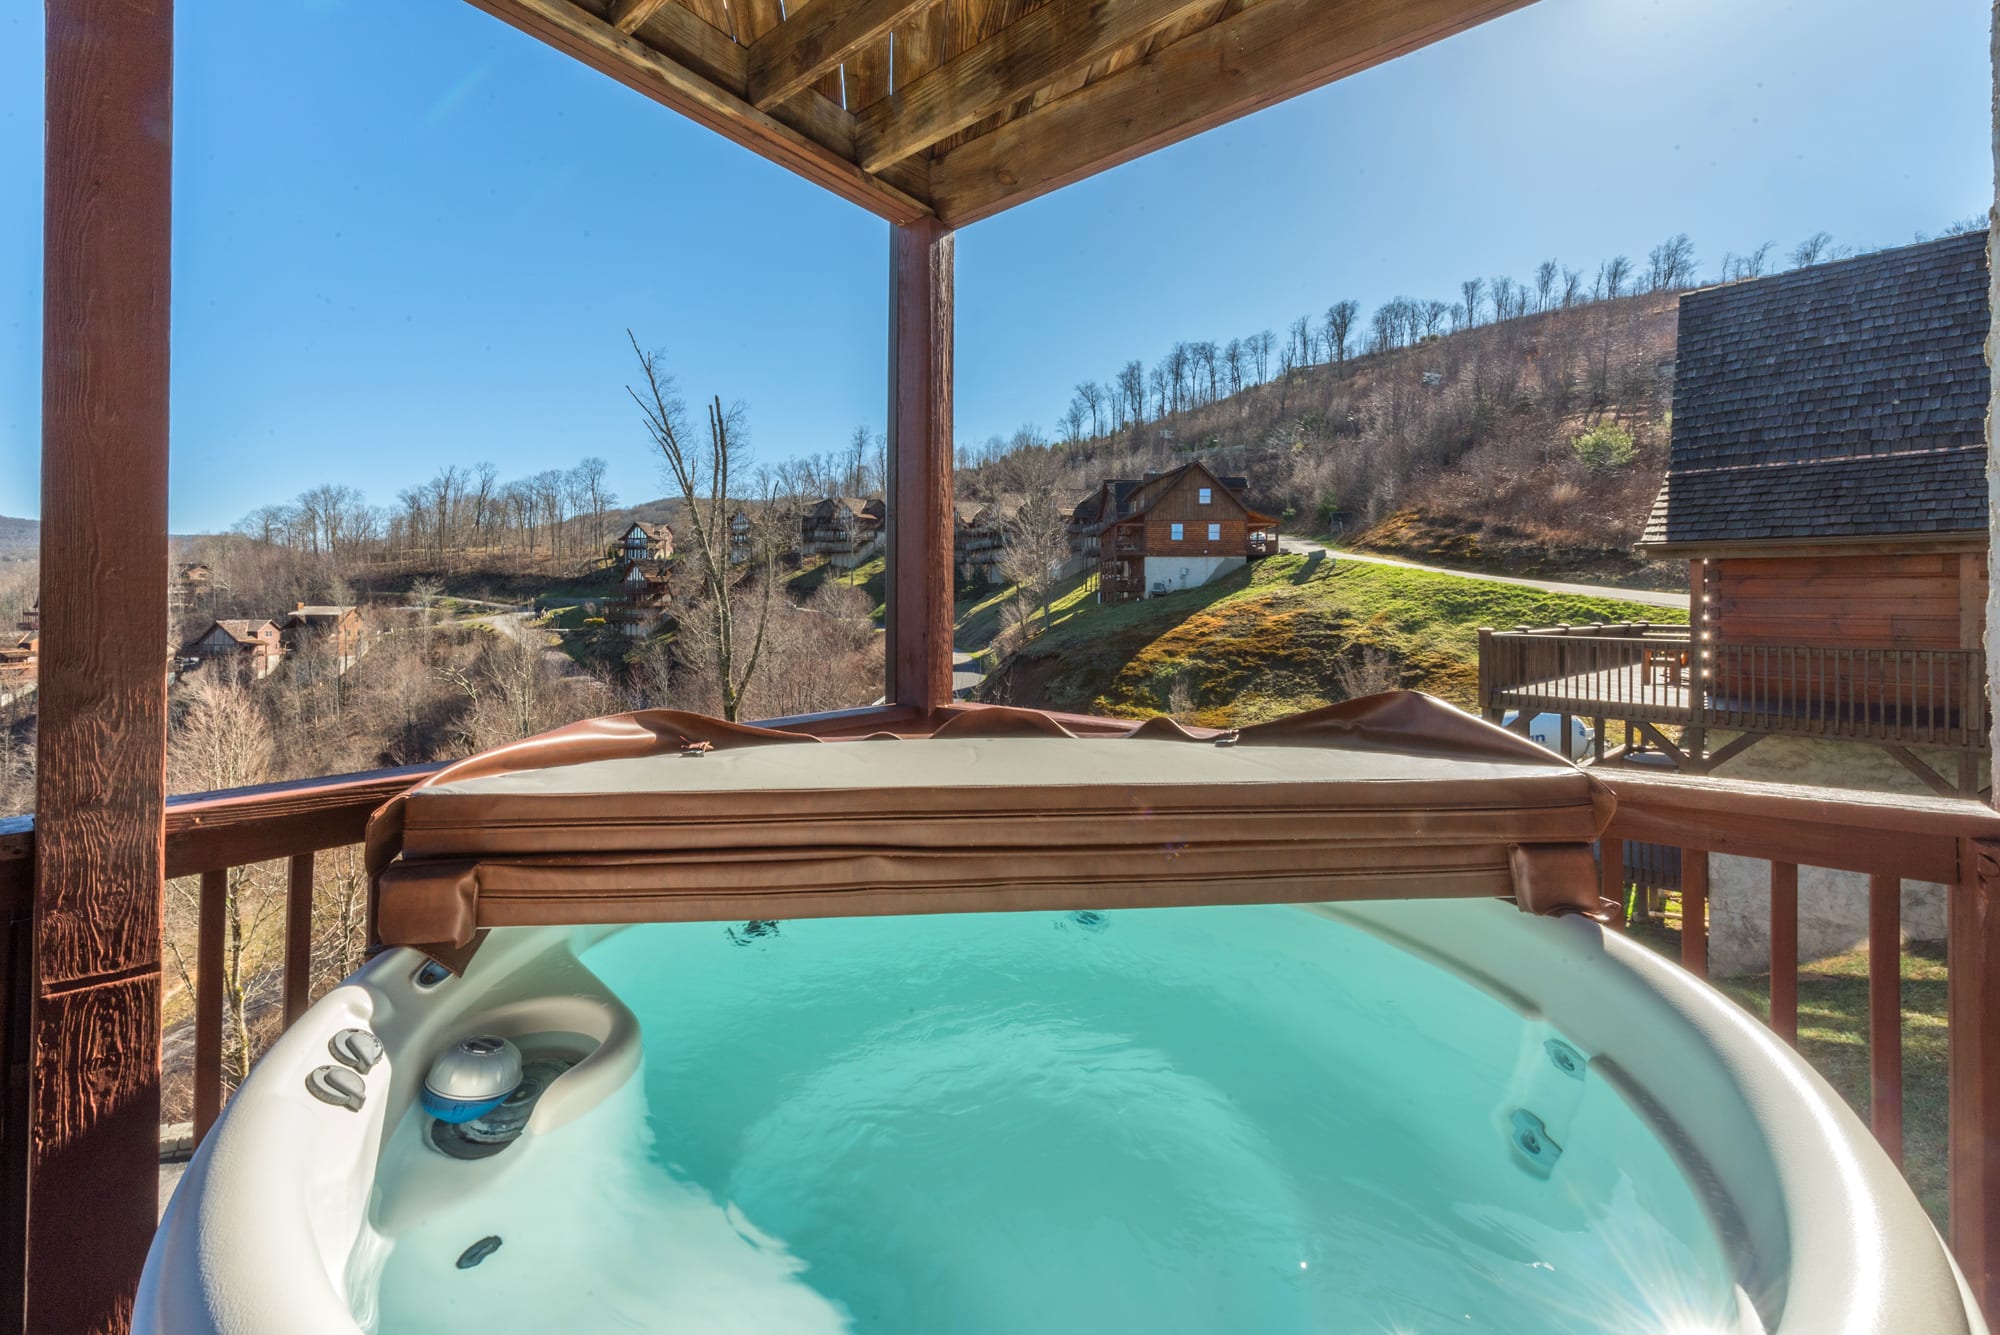 Take a soak in the hot tub while soaking in the view